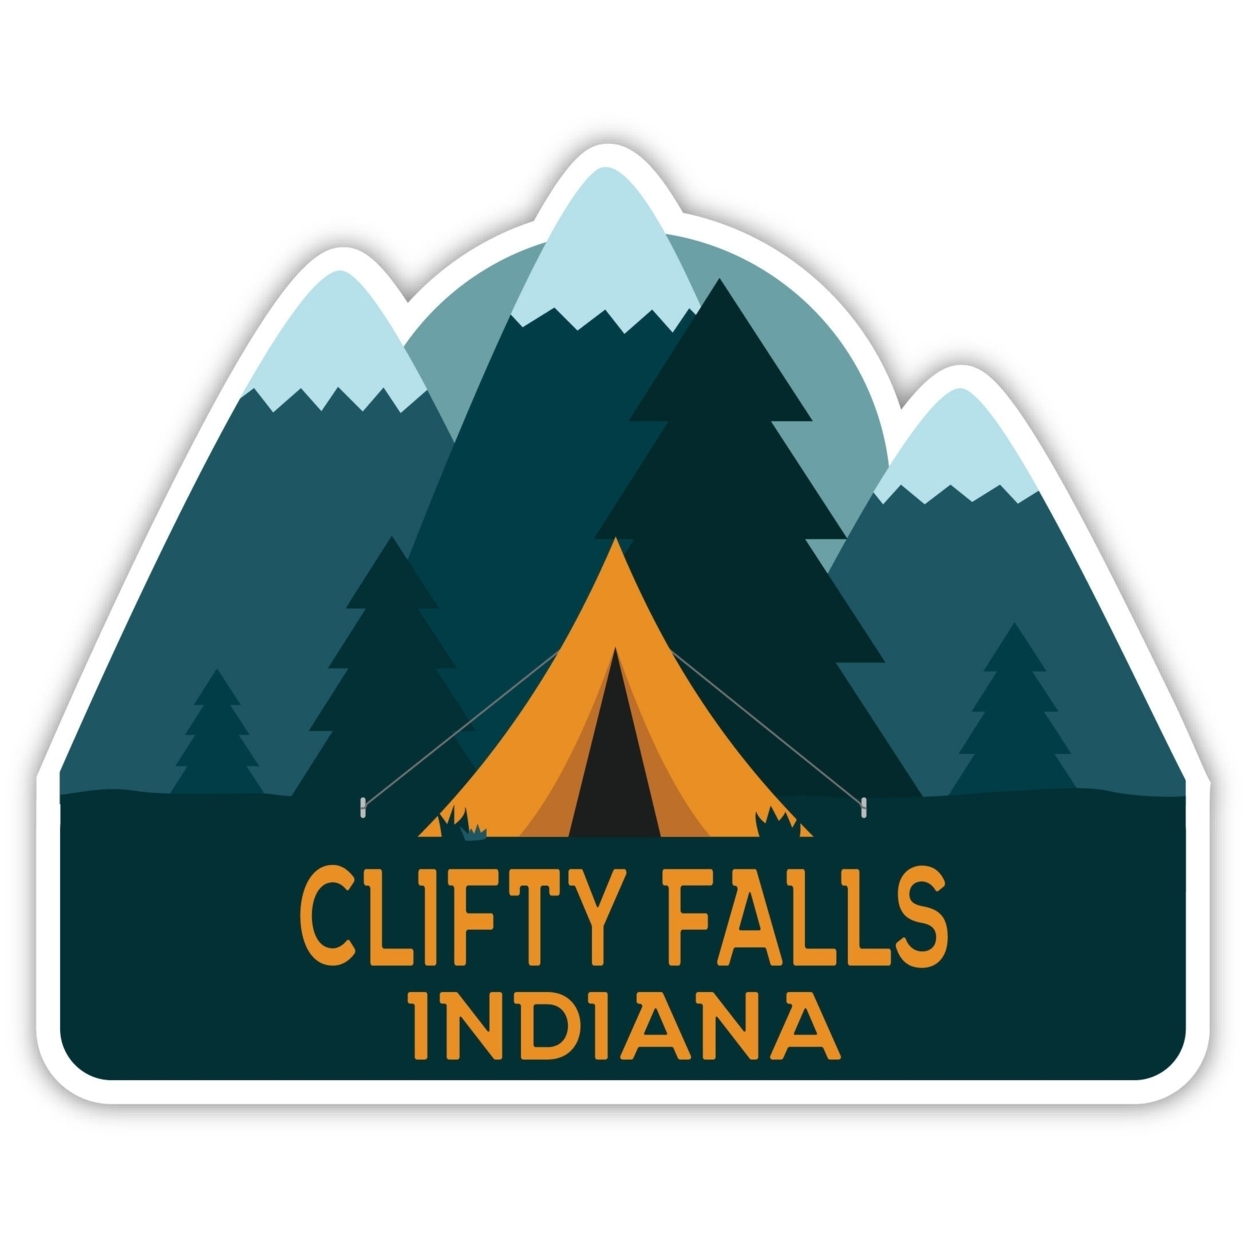 Clifty Falls Indiana Souvenir Decorative Stickers (Choose Theme And Size) - Single Unit, 2-Inch, Tent